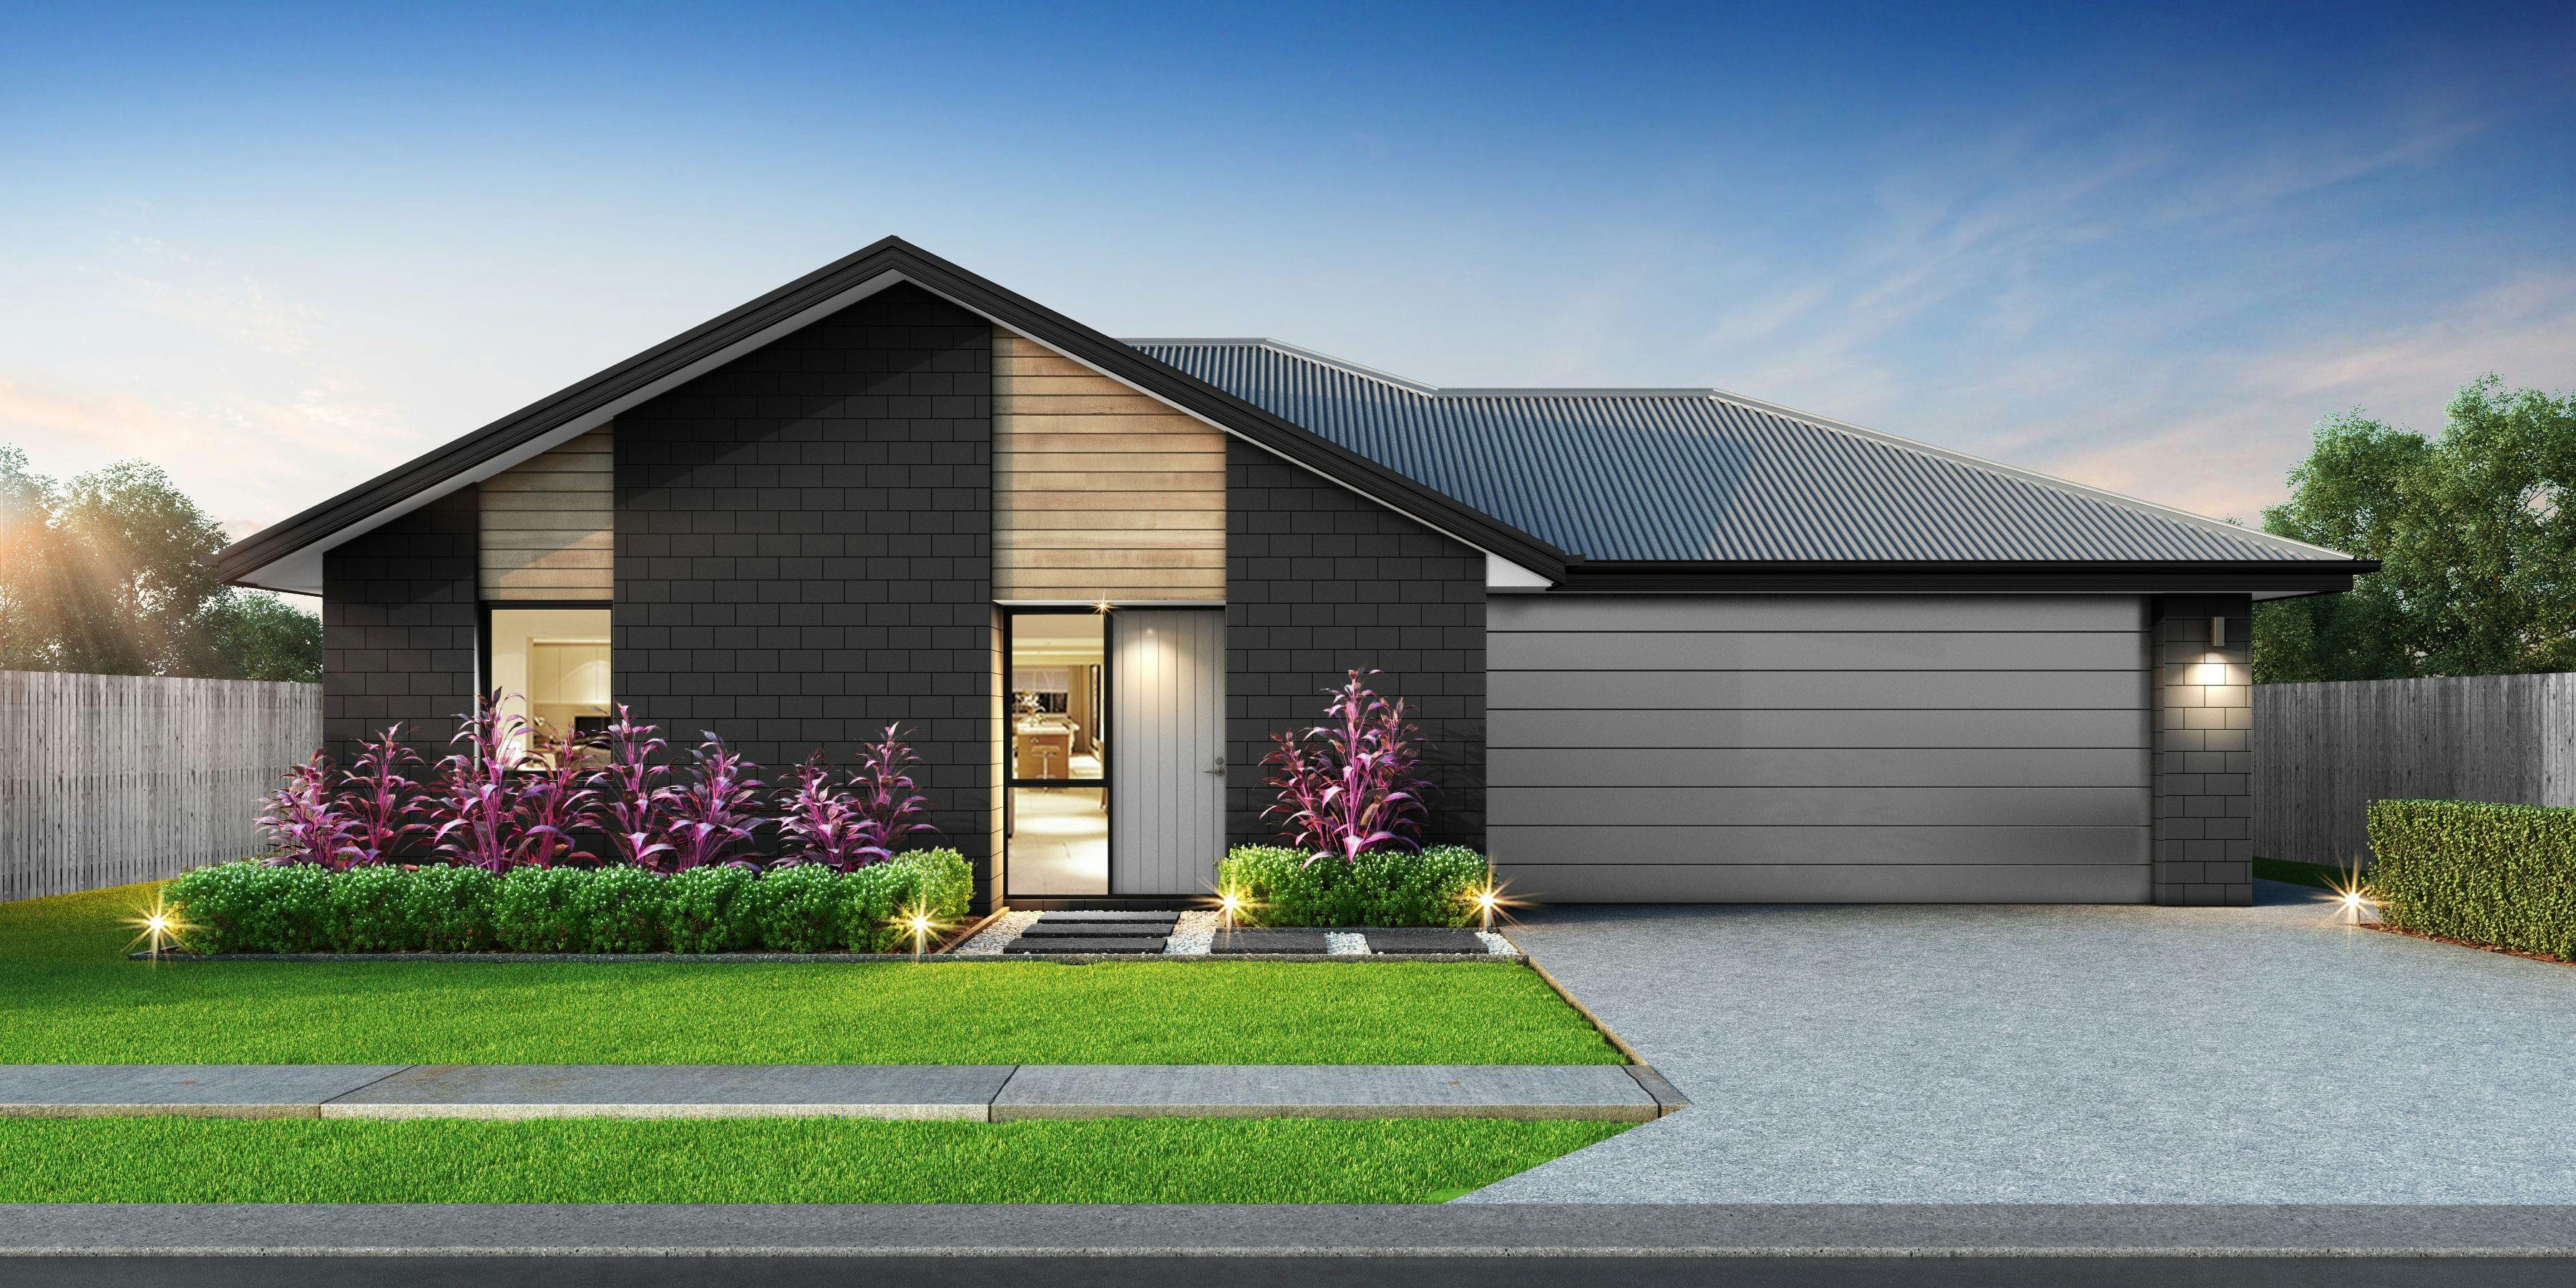 Lot 36, 21 Freeville Place, New Brighton, Christchurch $739,000